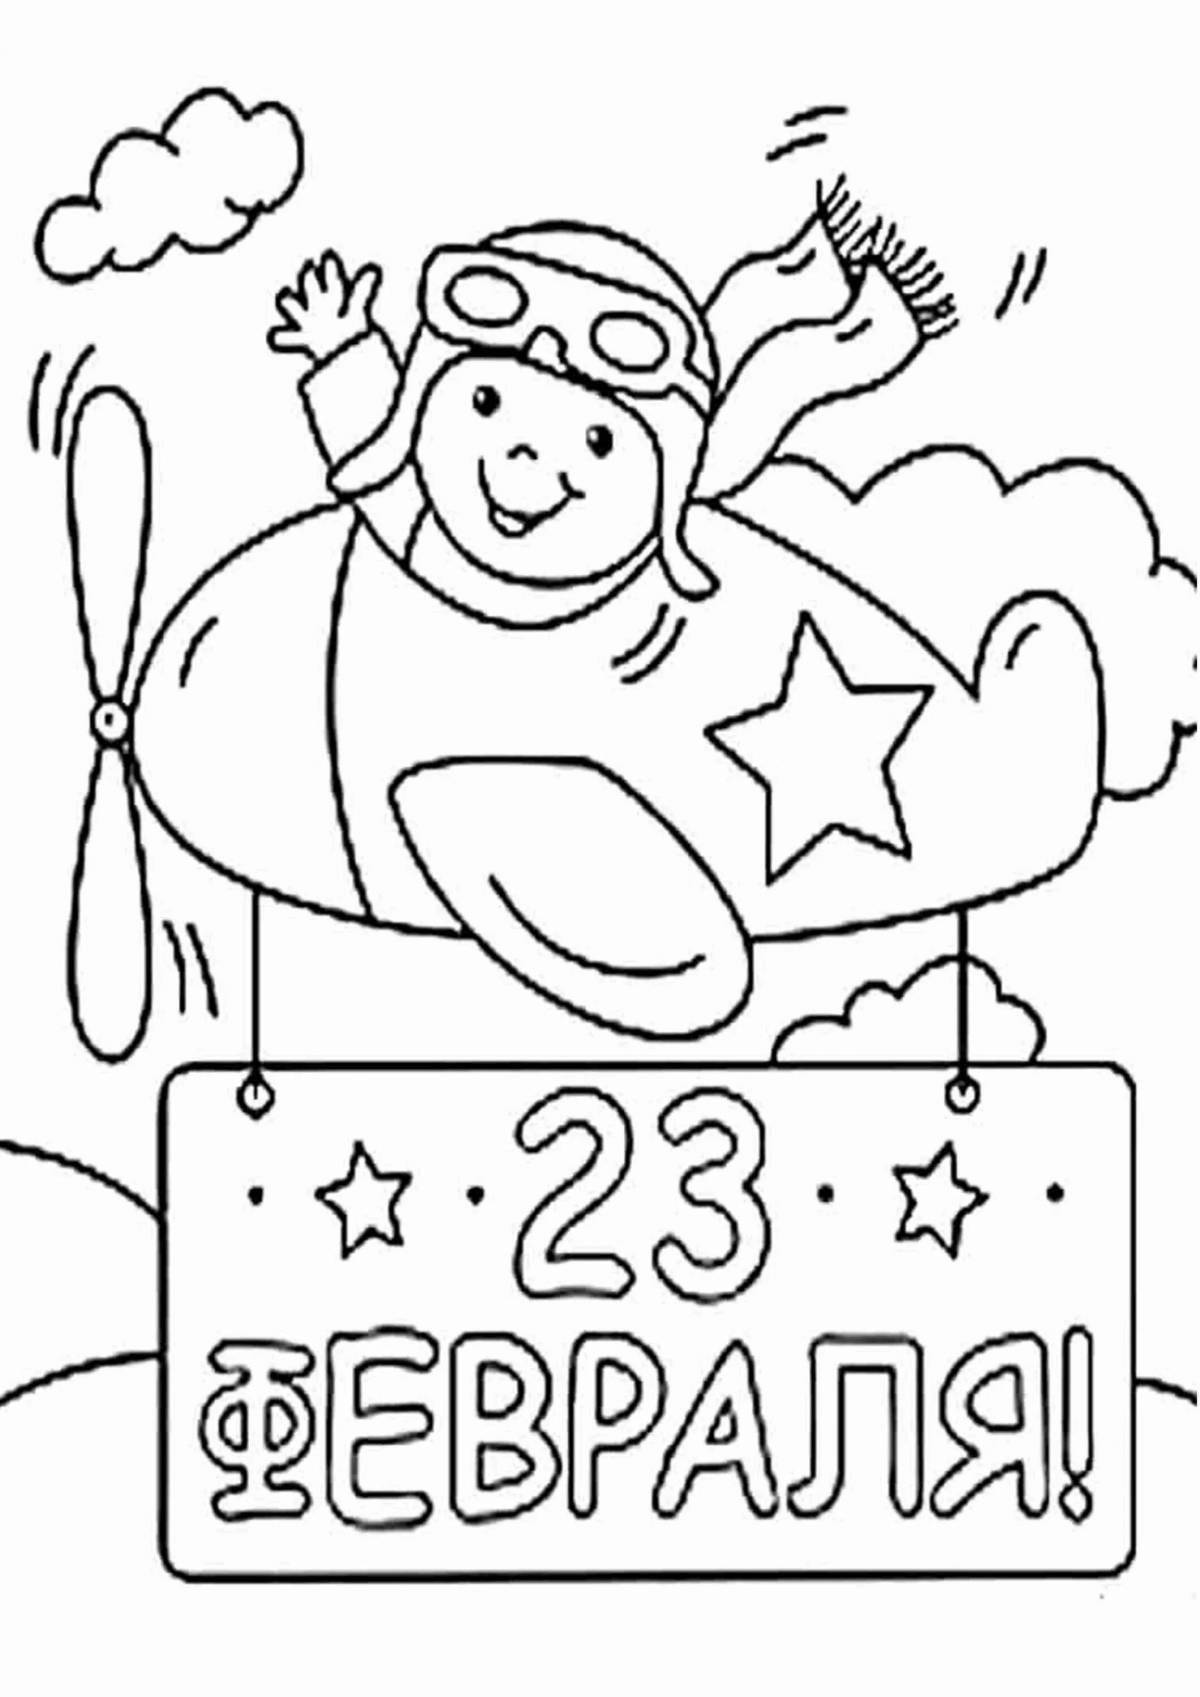 A fascinating coloring book for February 23 for kindergarten